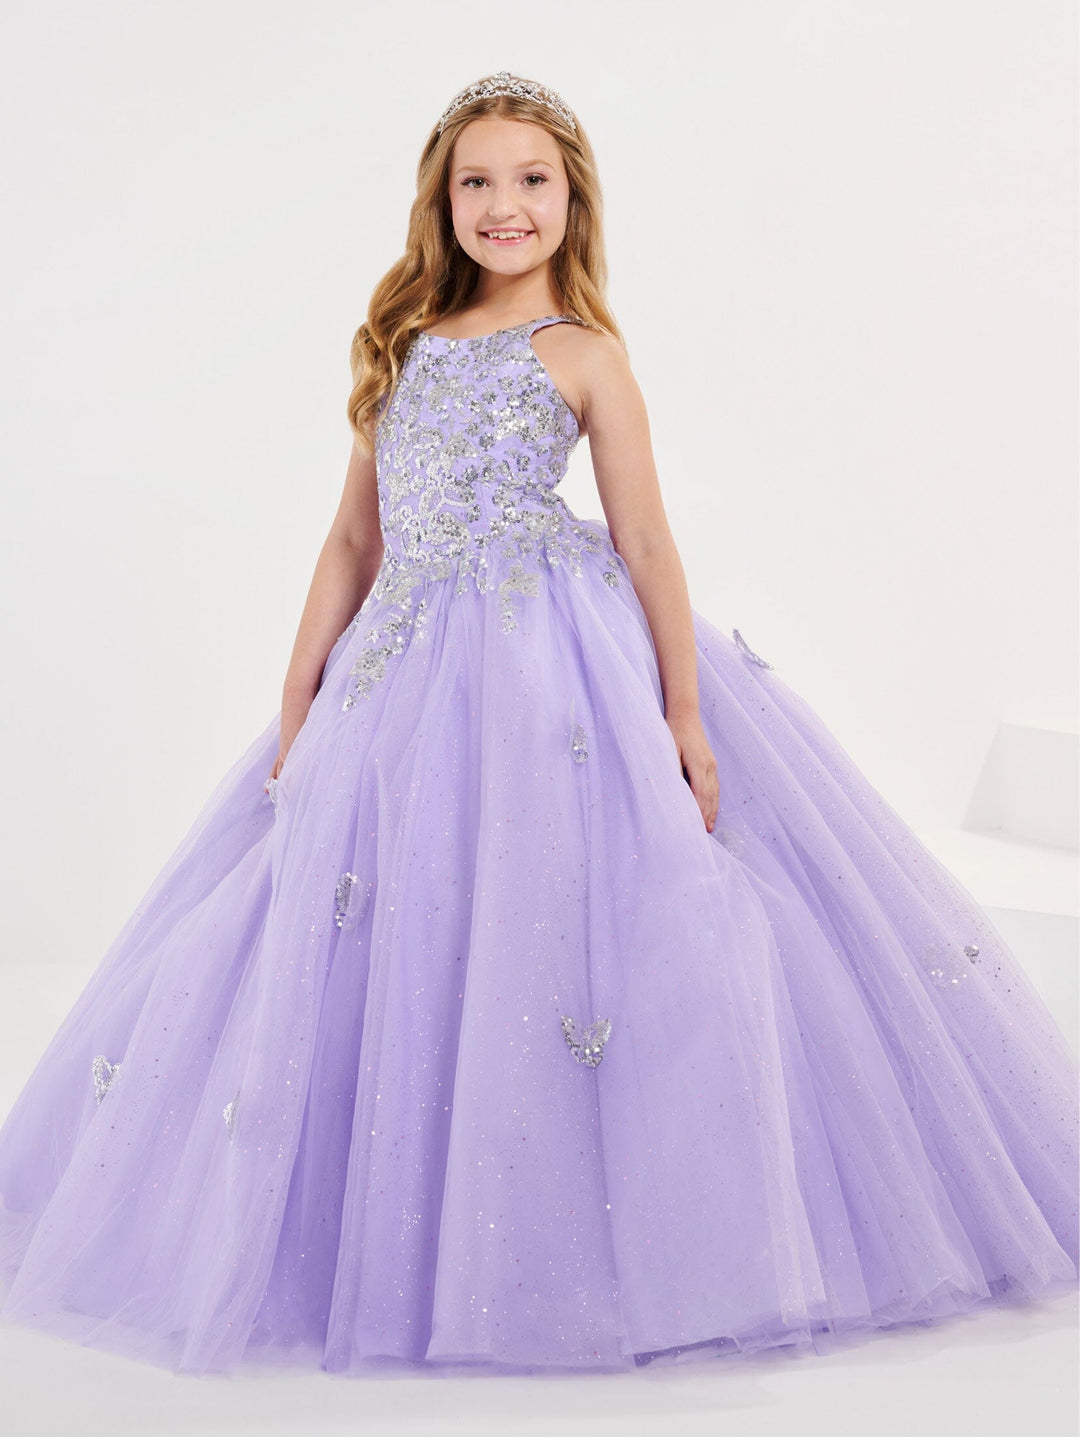 Girls 3D Butterfly Halter Gown by Tiffany Princess 13699